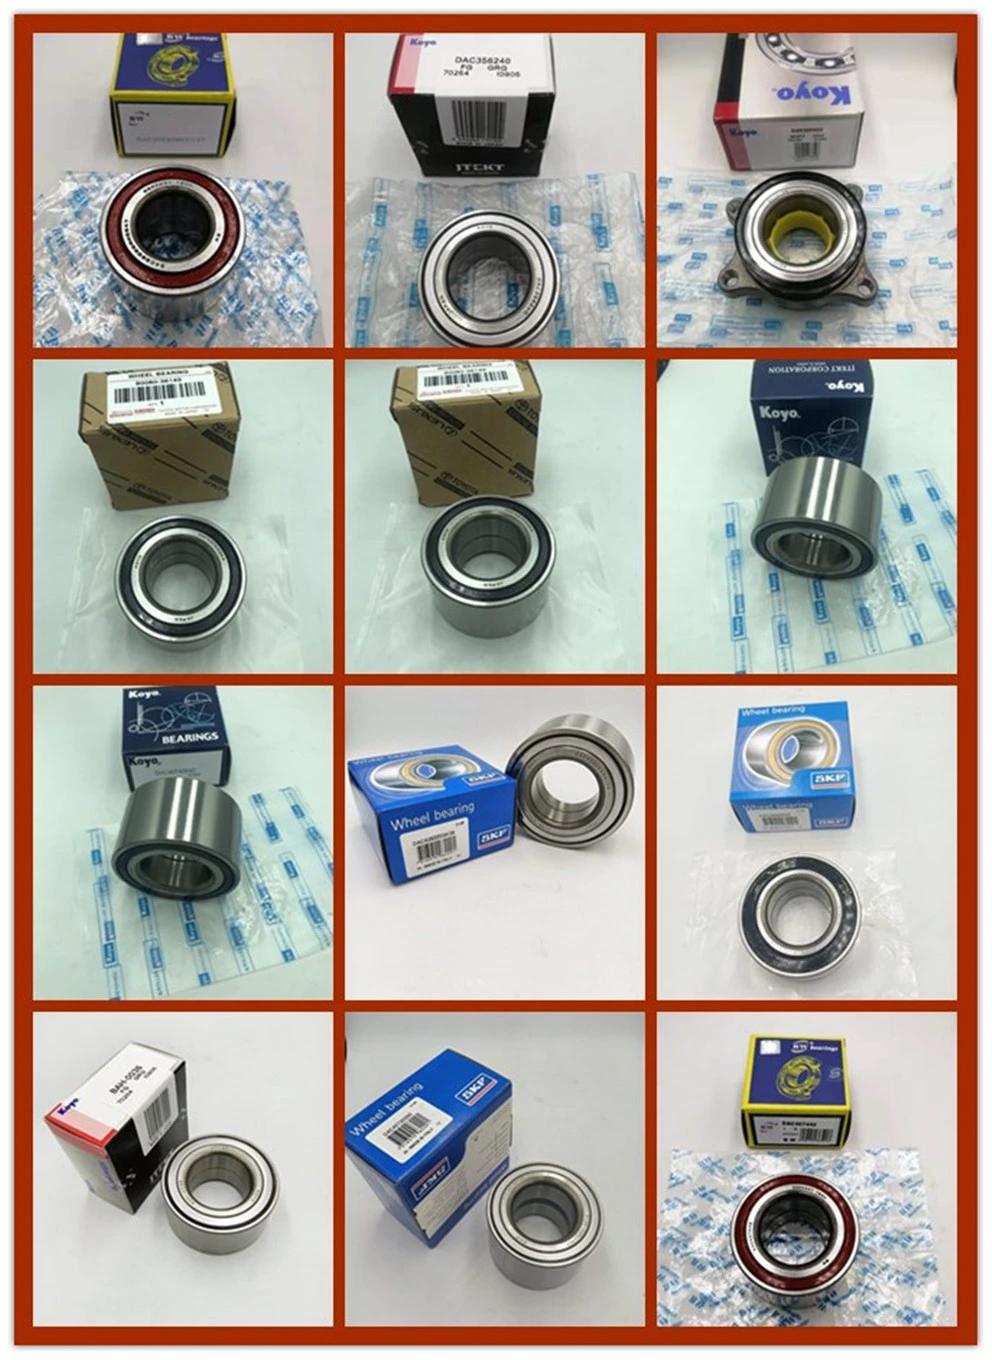 C073 01845 1004070240 Vkh2267 3735.15 4470124 291407645 Auto Wheel Bearing for Nassan Car with Factory Price